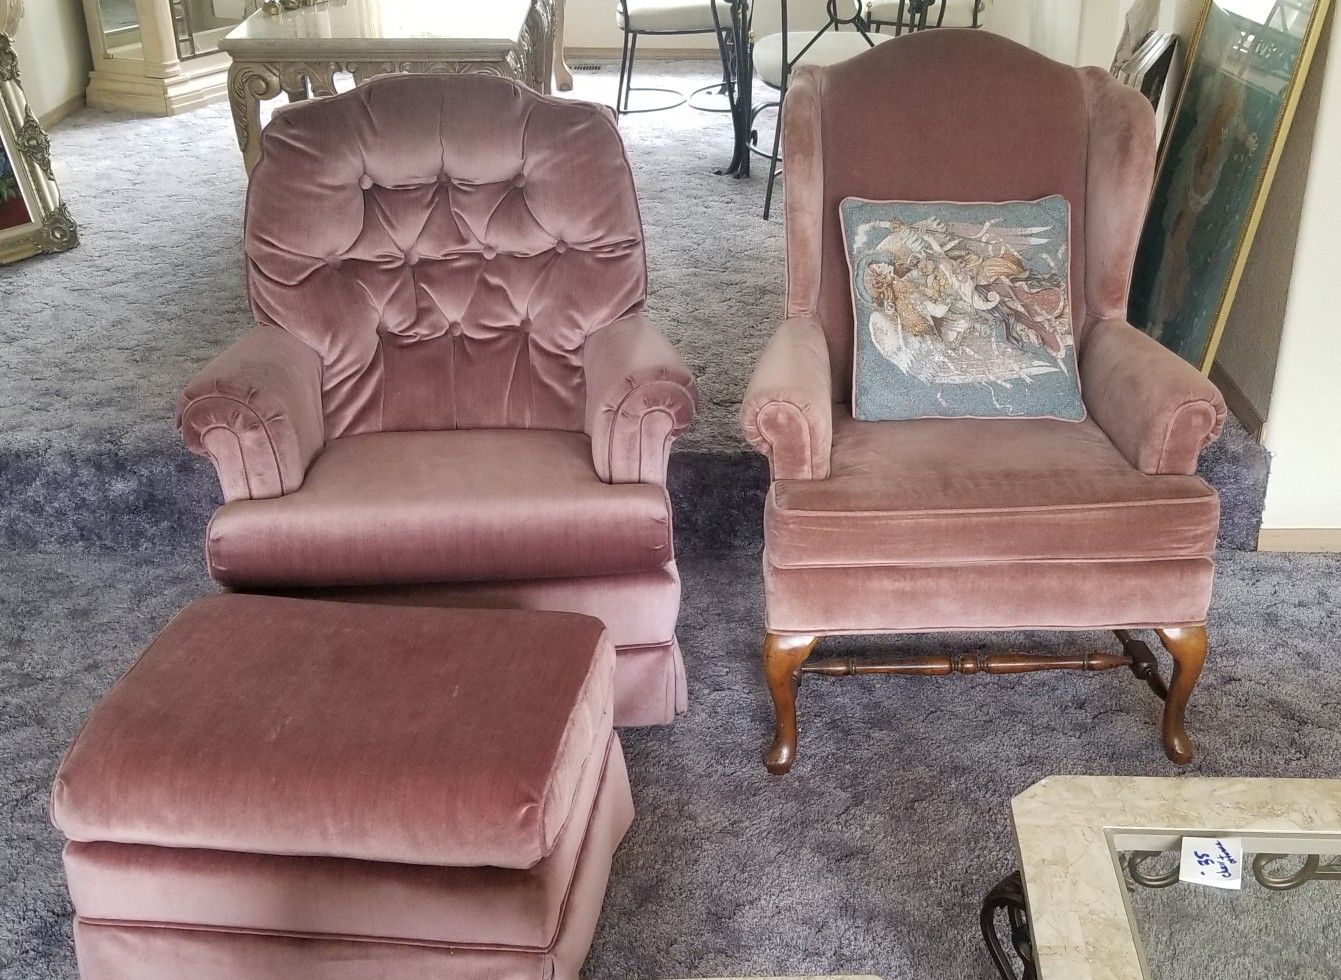 *PENDING* FREE CHAIRS & OTTOMAN